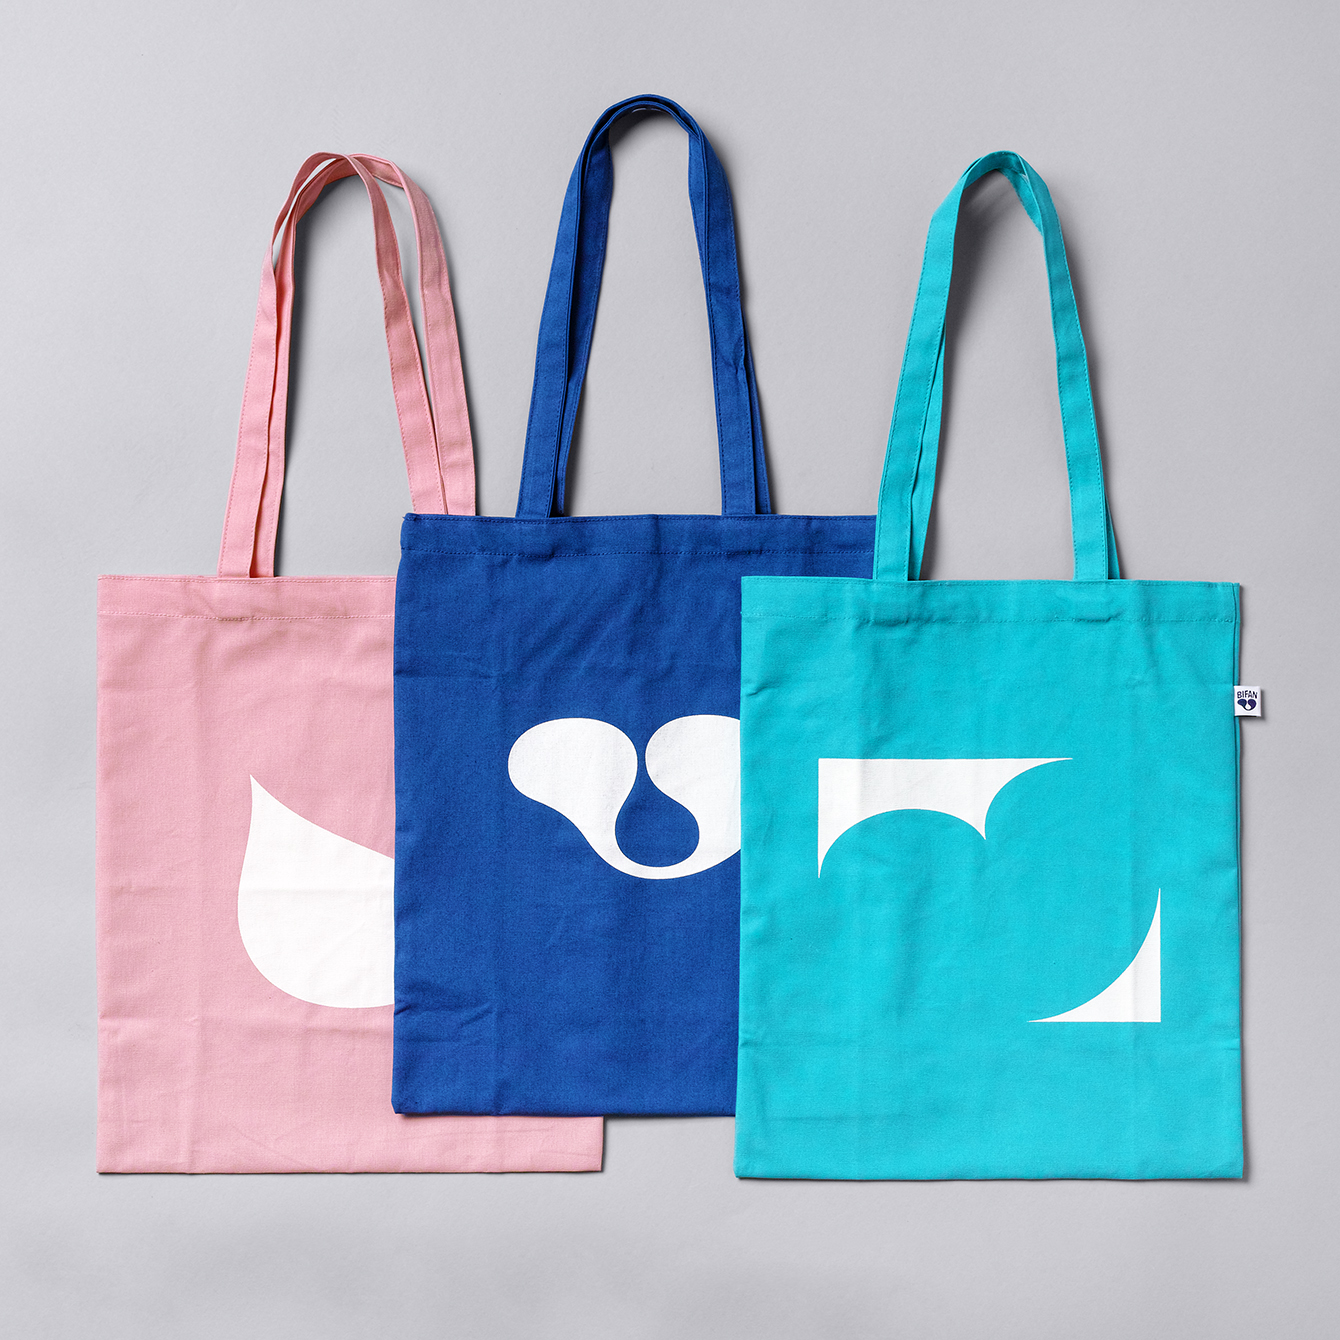 Brand identity and branded tote bags by Studio fnt for 20th Bucheon International Fantastic Film Festival, South Korea